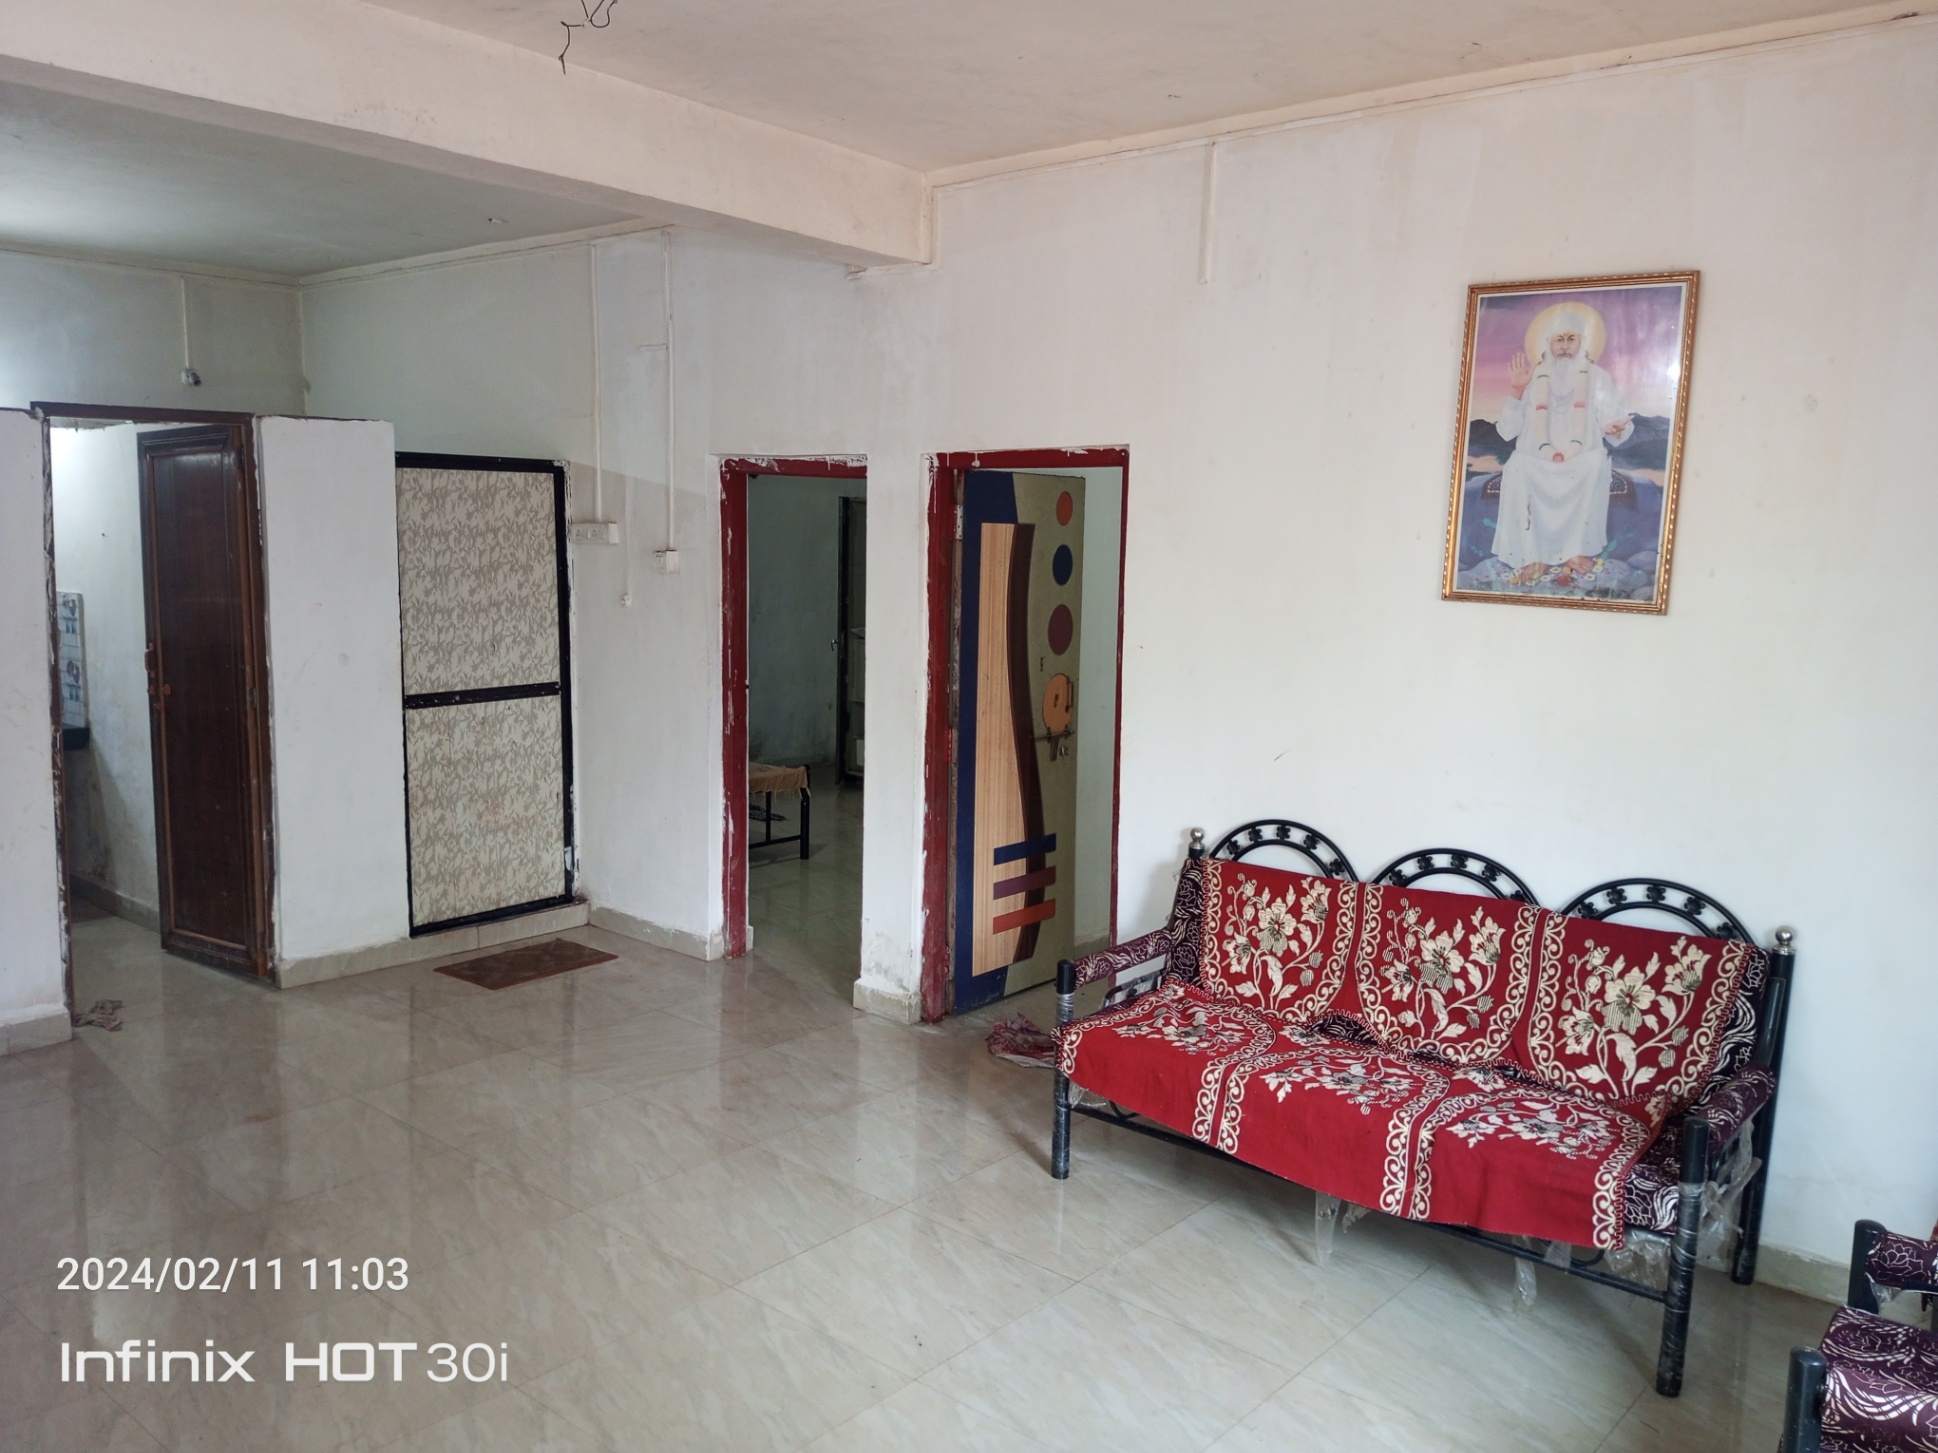 2 Bed/ 1 Bath Rent Apartment/ Flat; 9,000 sq. ft. carpet area, Semi Furnished for rent